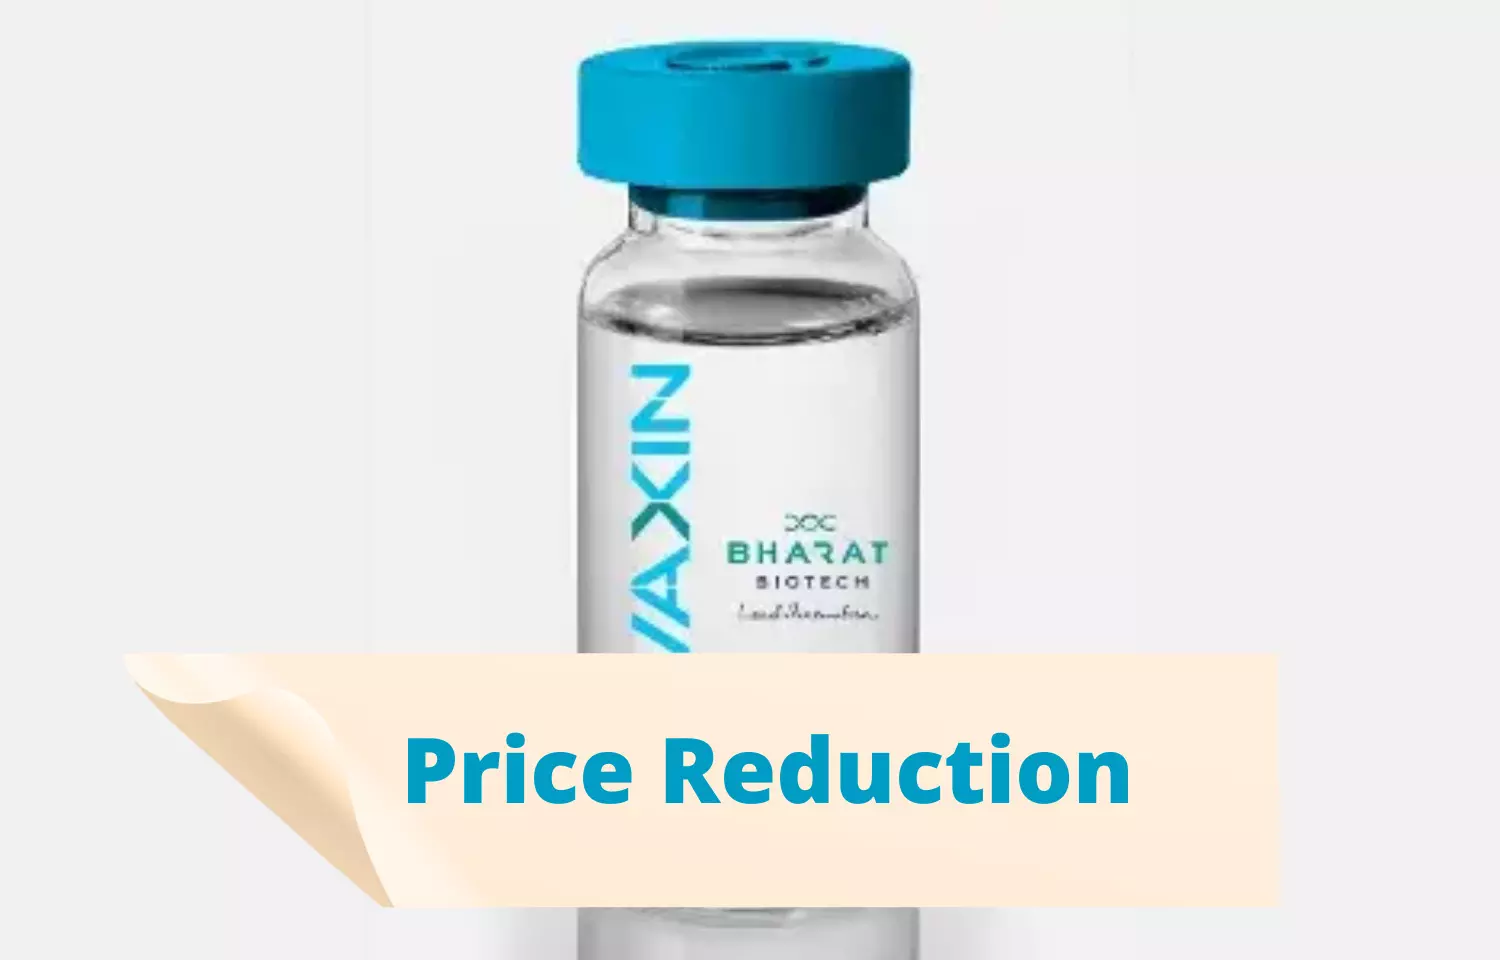 Price reduction: Bharat Biotech Covaxin price slashed to Rs 225 per dose